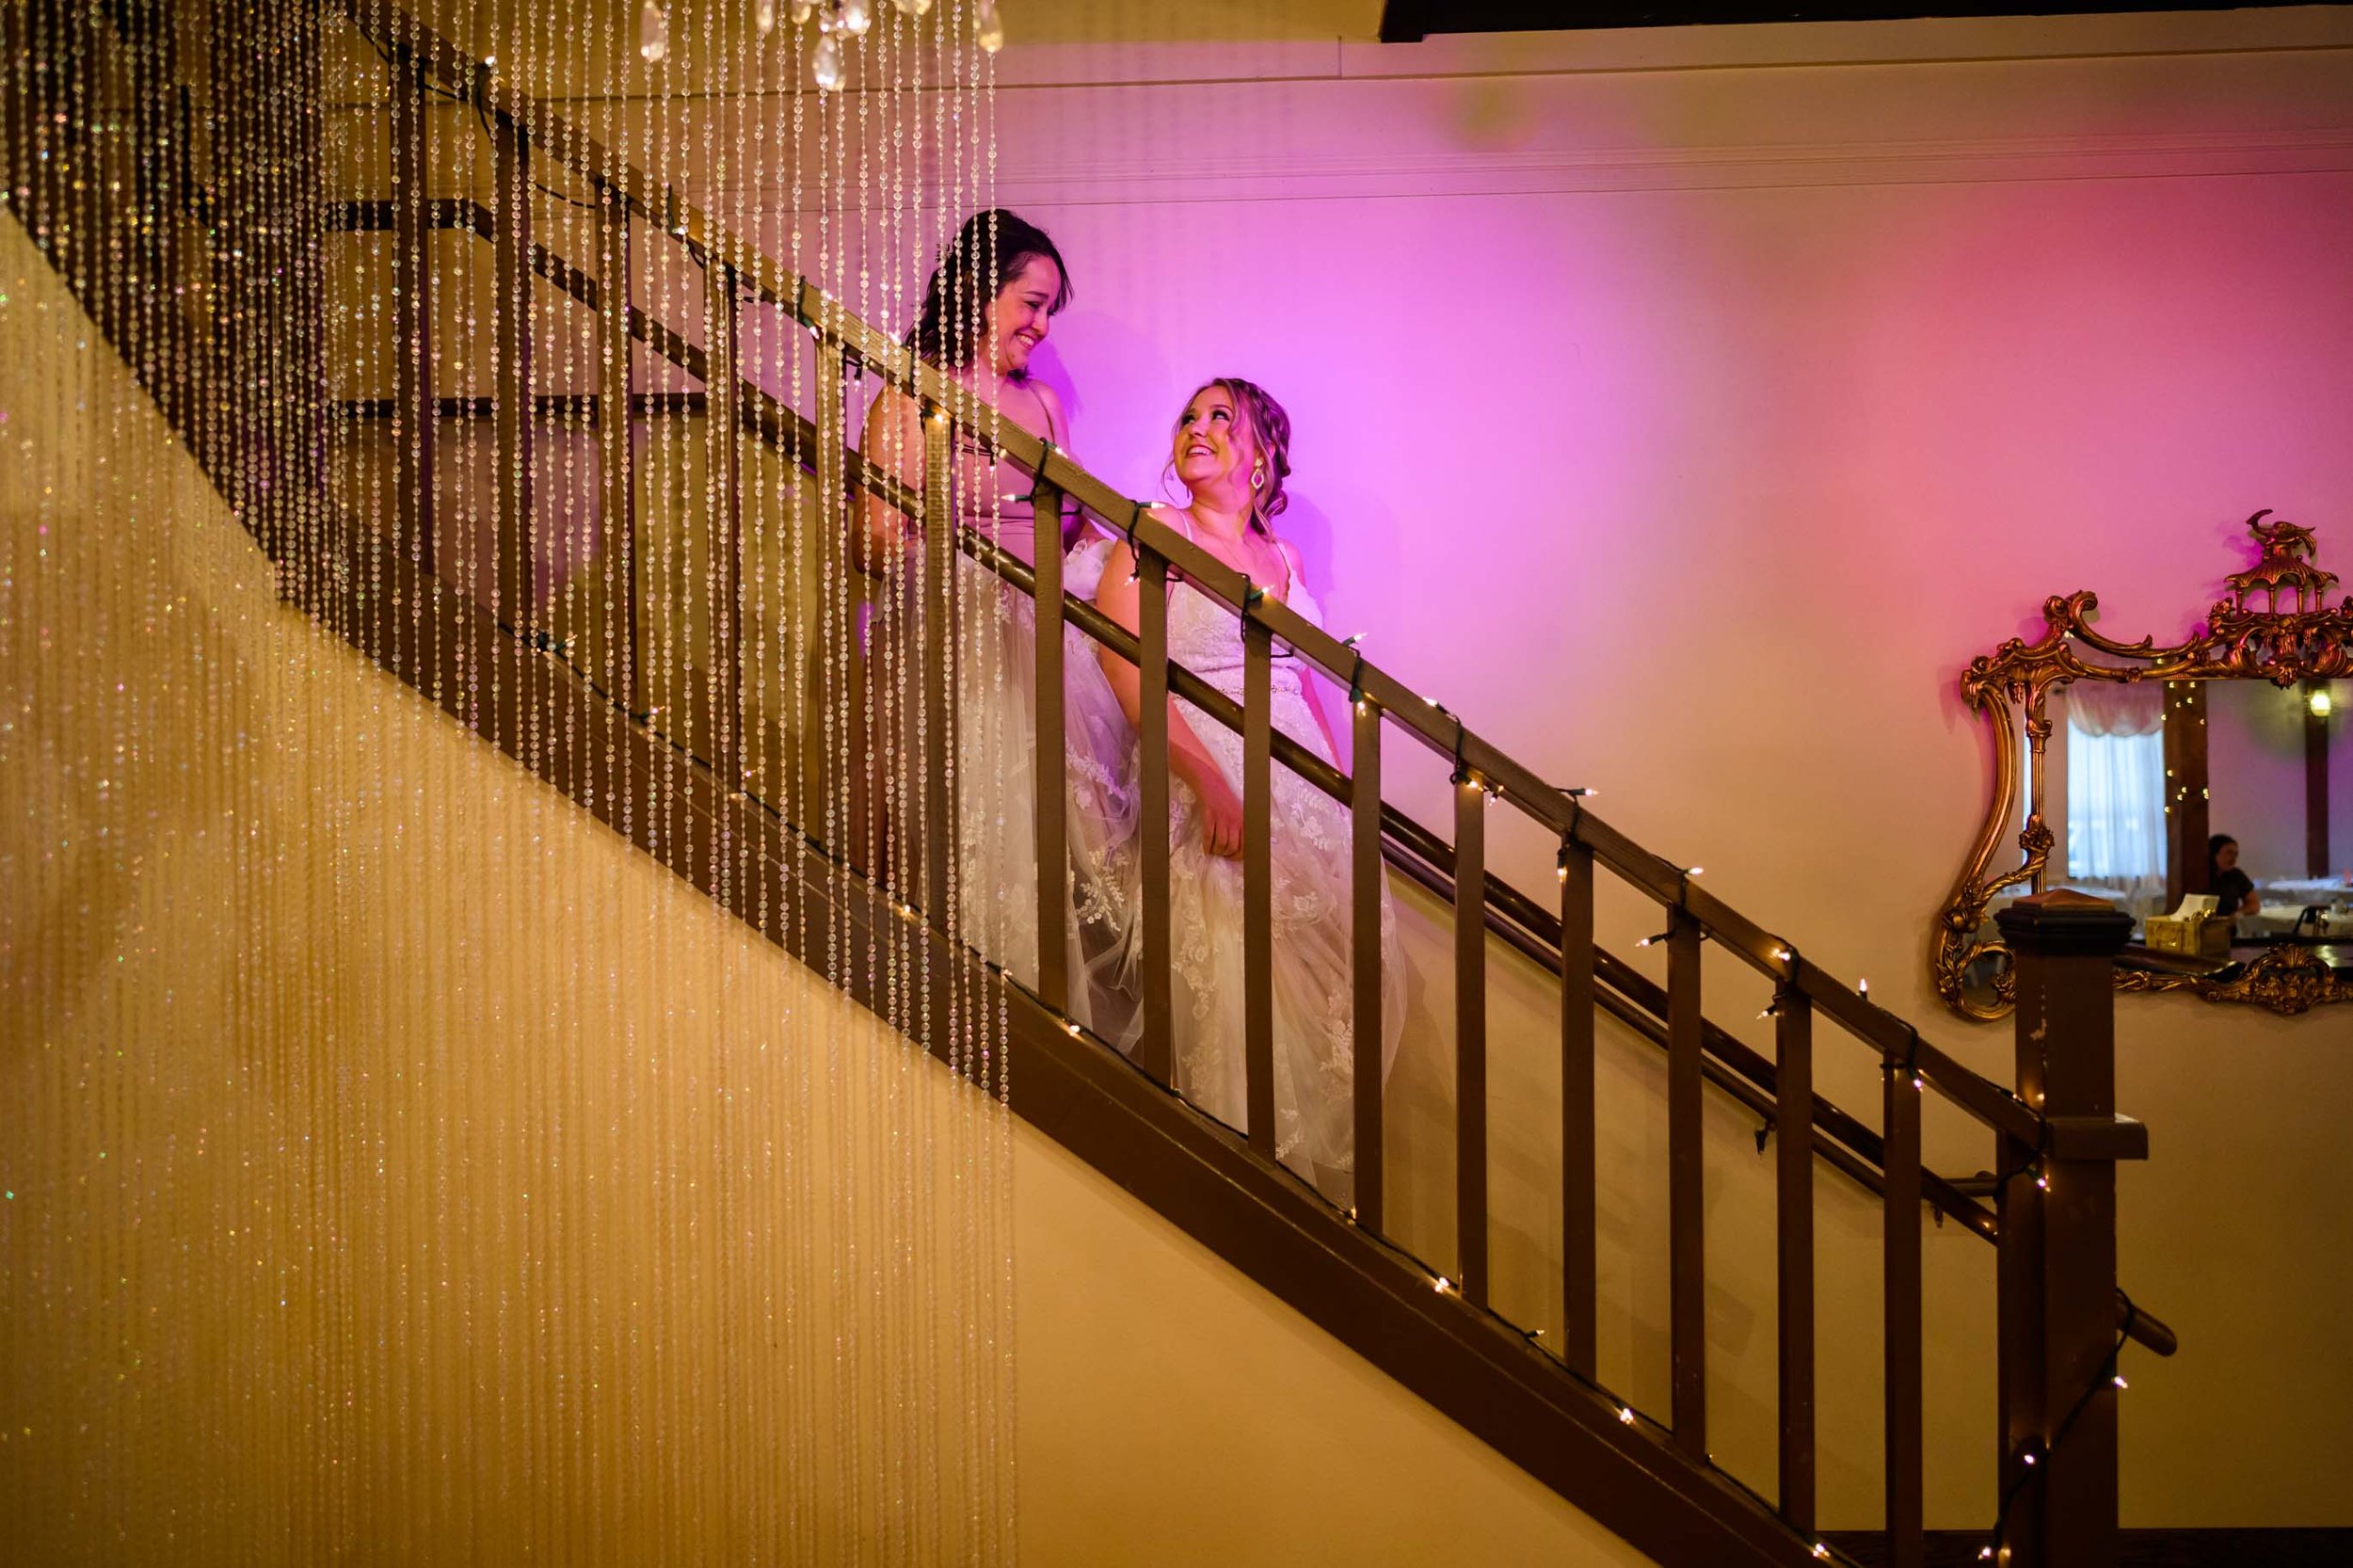 troutdale house wedding photo 12.JPG